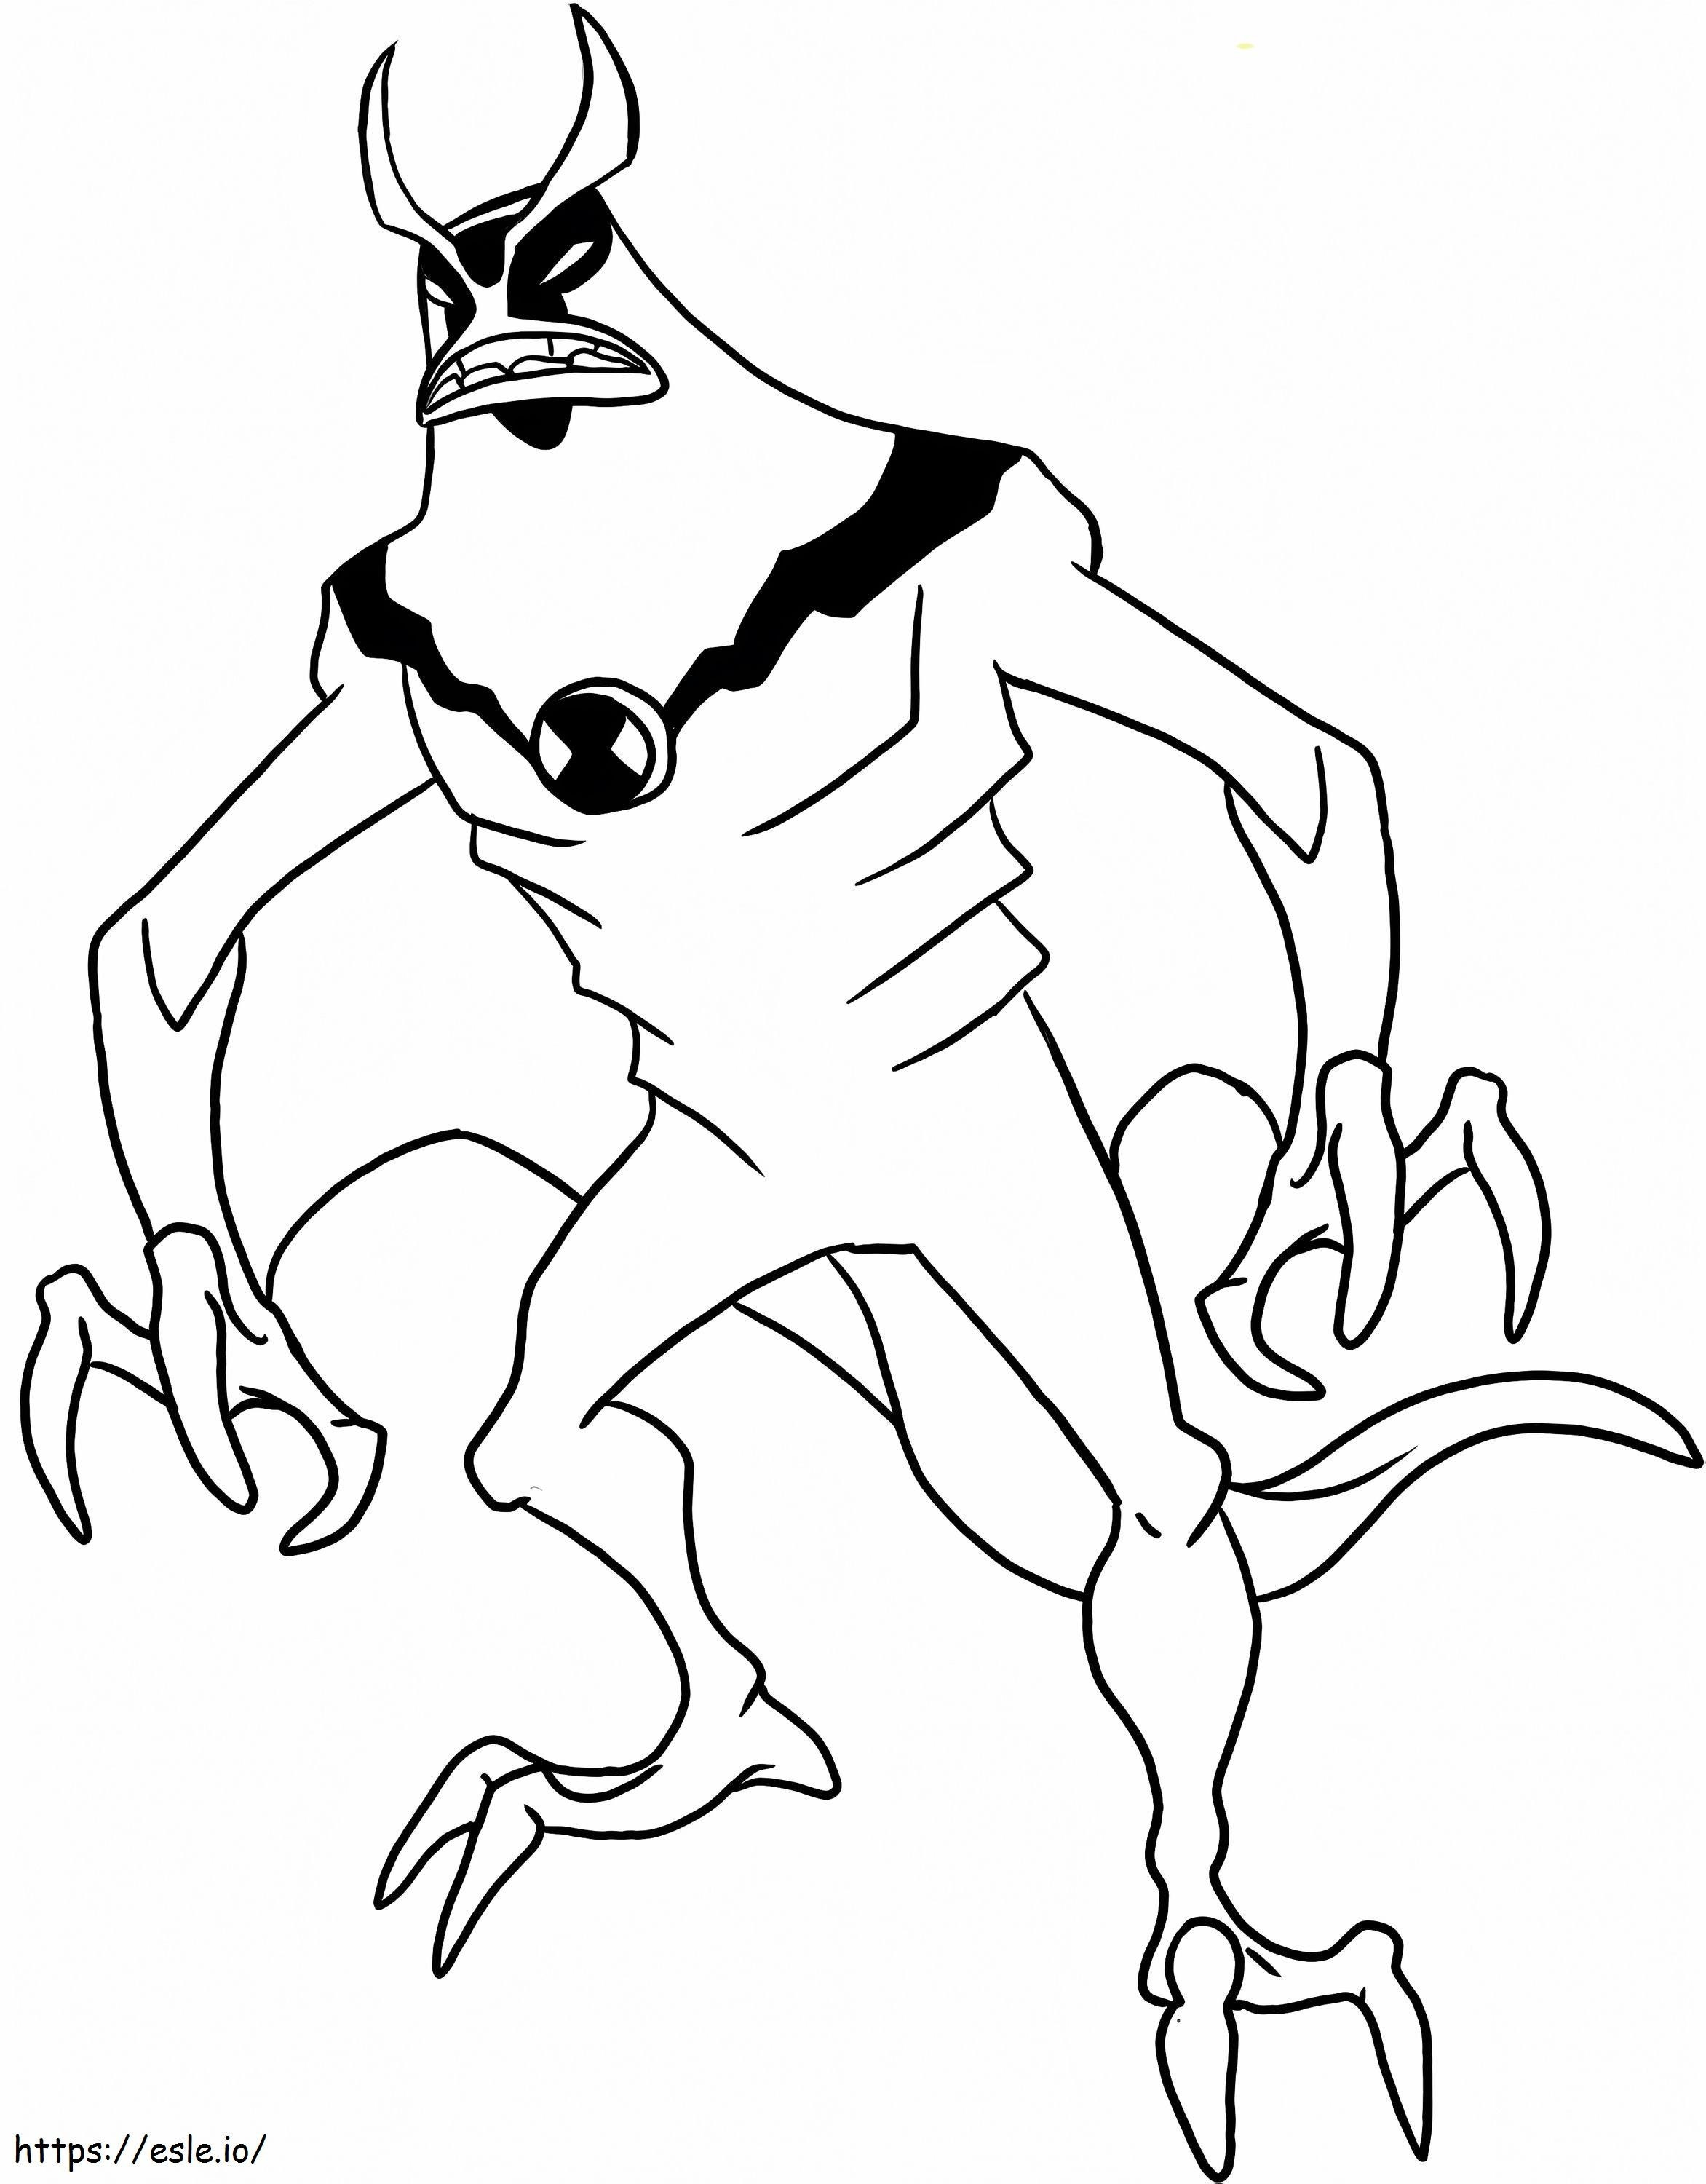 1542162232 How To Draw Ben 10 Aliens Jetray Step 7 coloring page